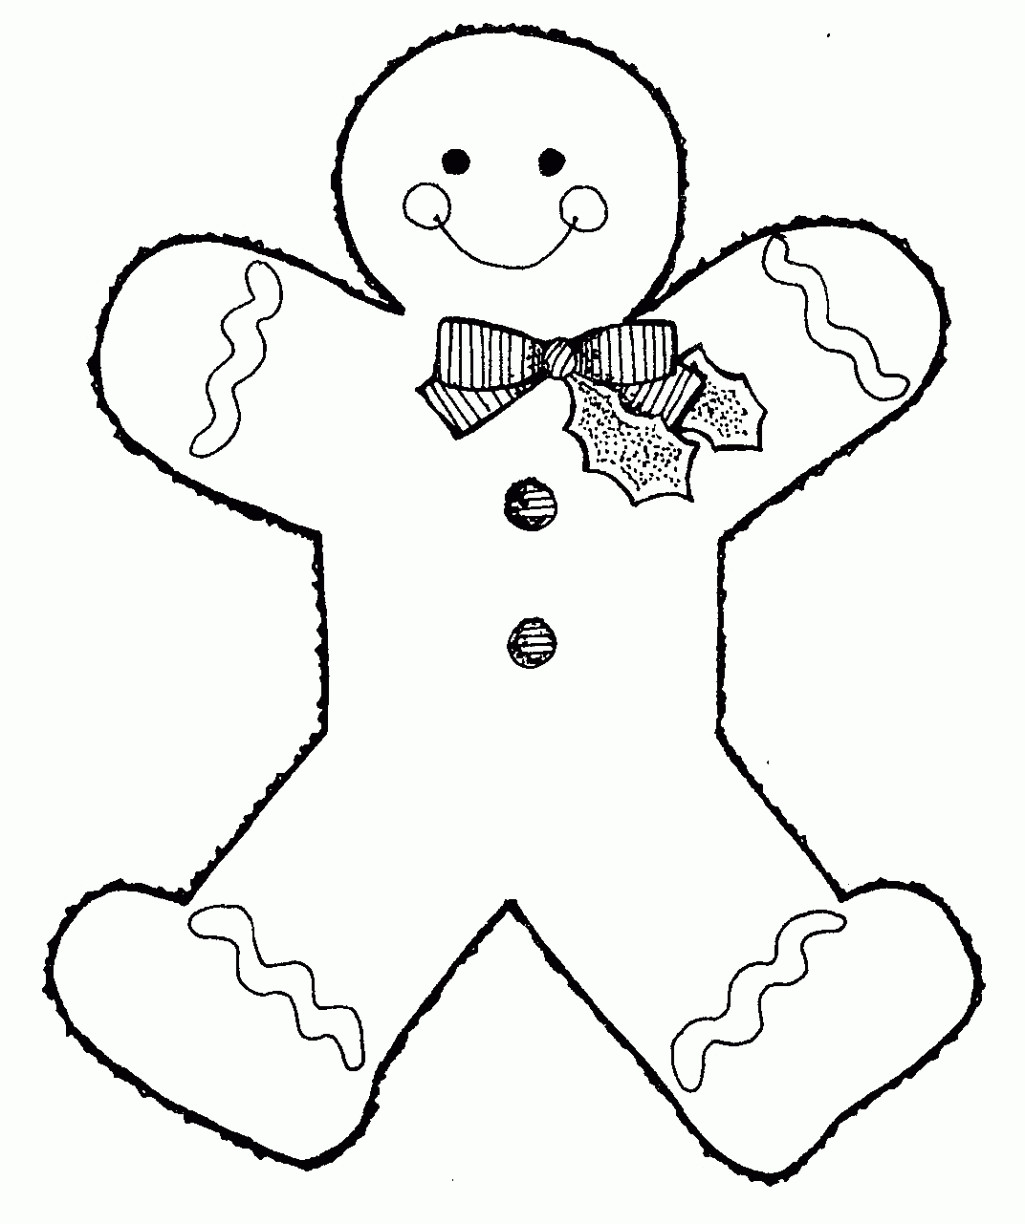 Gingerbread Boy And Girl Coloring Pages
 Gingerbread Boy And Girl Coloring Pages Coloring Home